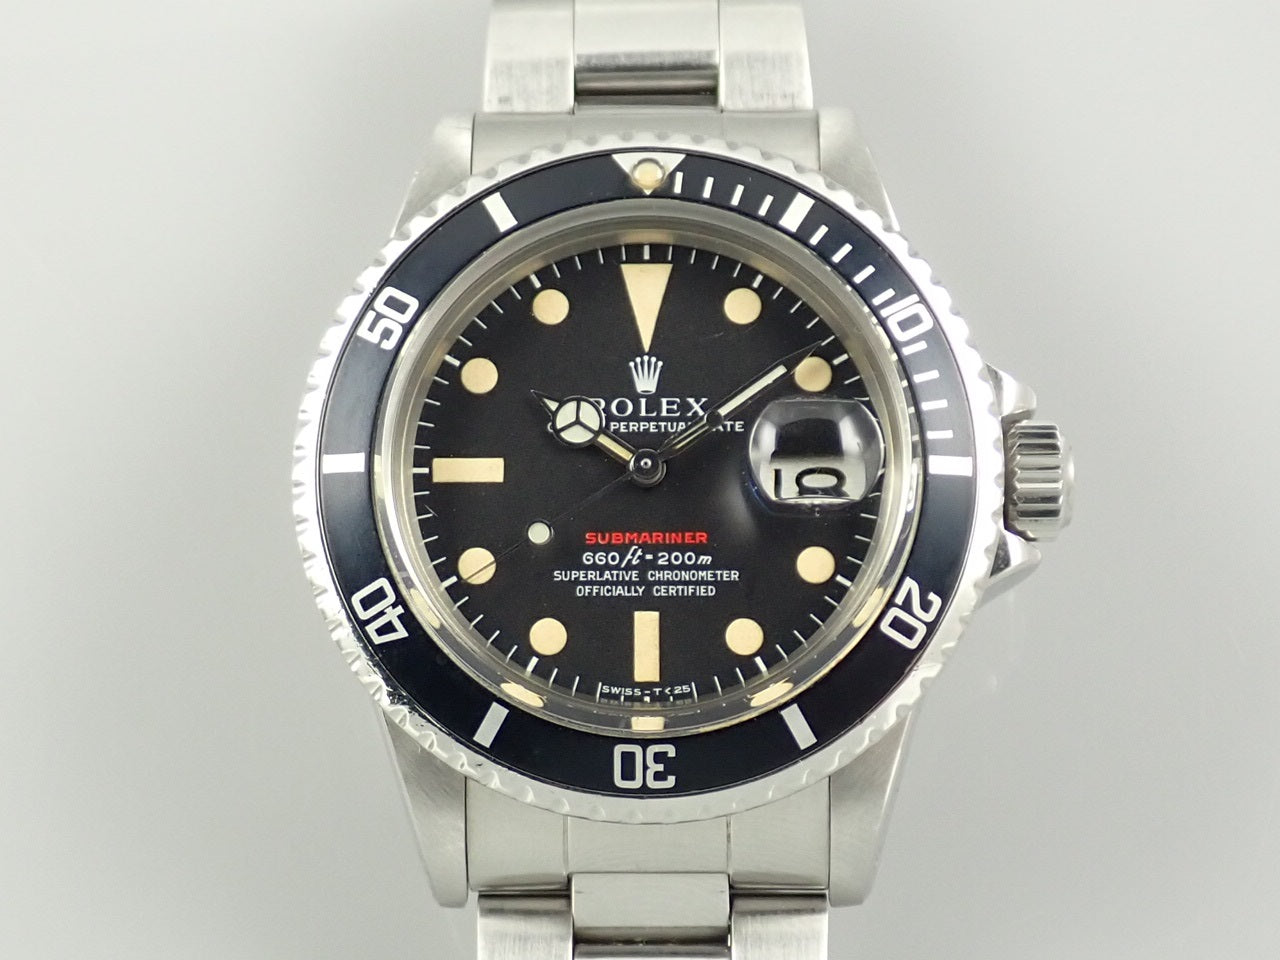 Rolex Red Submariner &lt;Box and other details&gt;